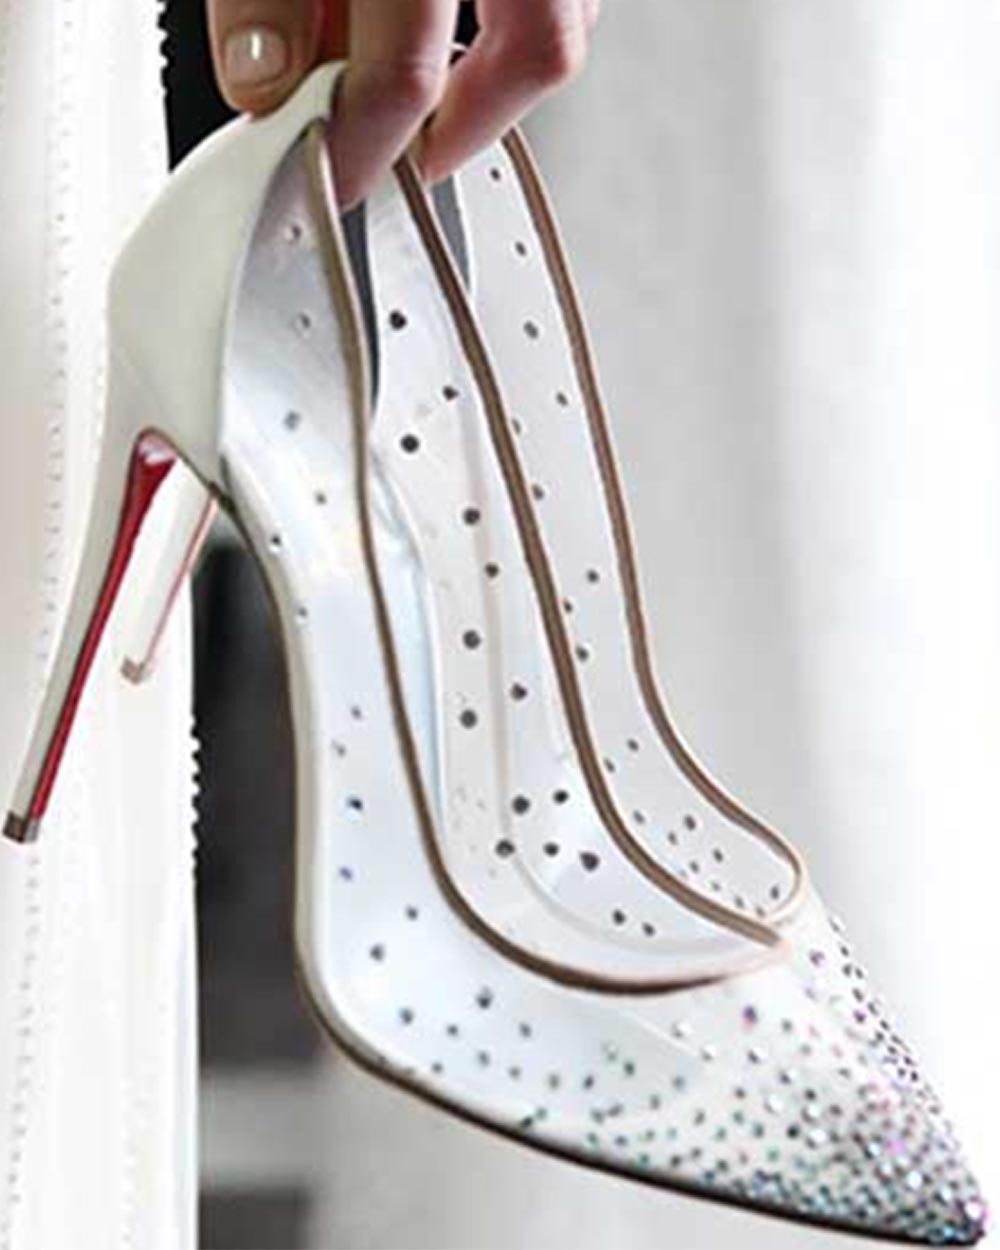 Christian Louboutin releases bridal shoe collection